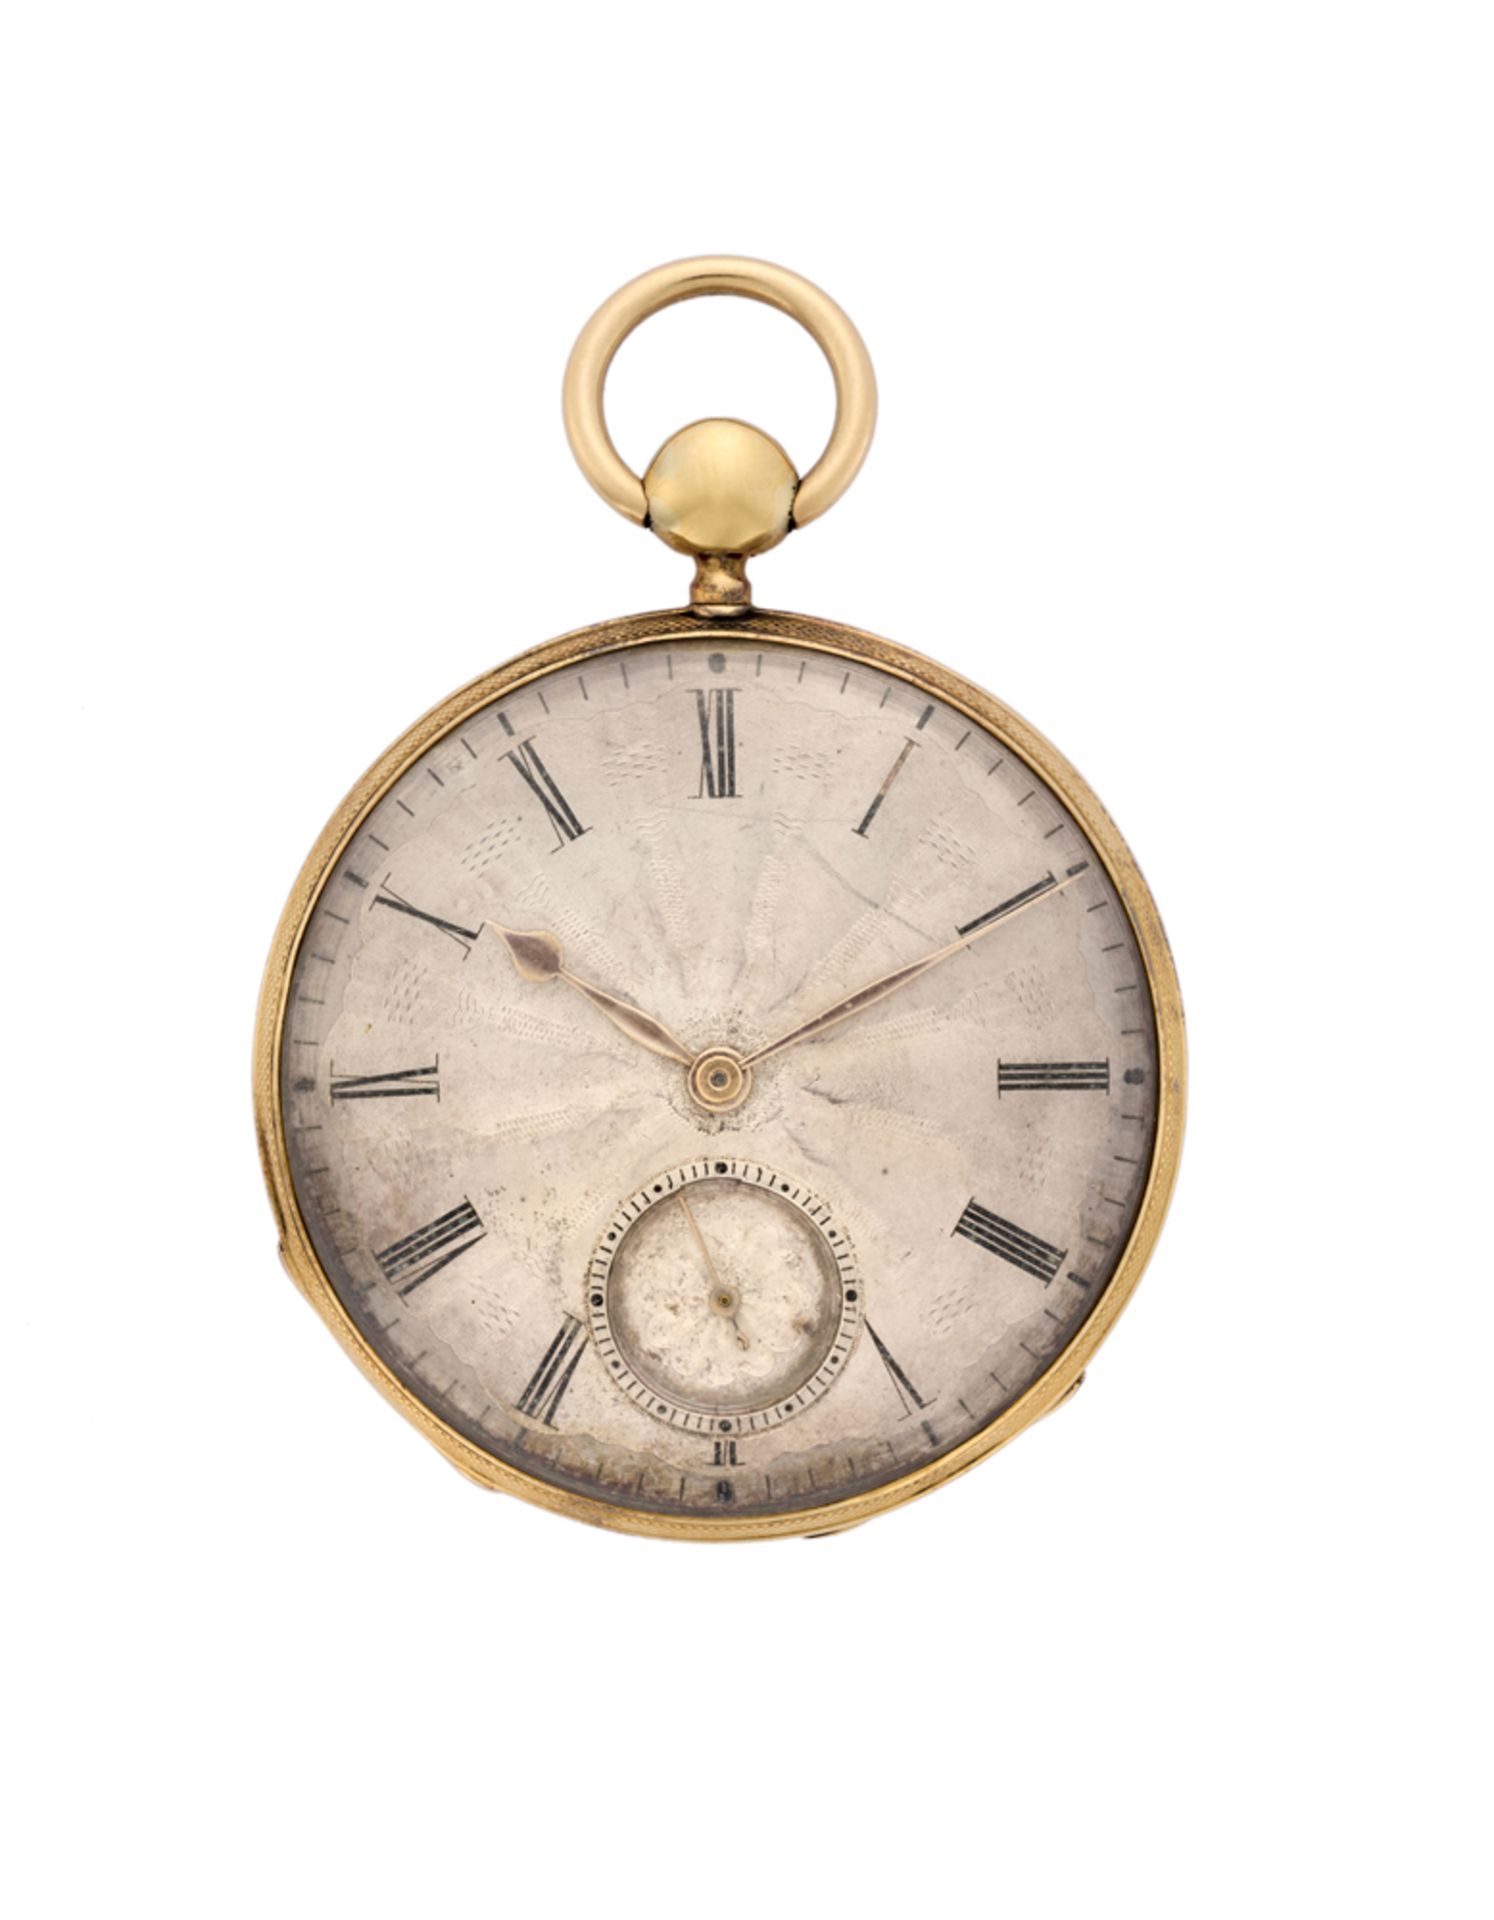 ANONYMOUSGent's 18K gold pocket watchLate 19th centuryKey-wind movementSilvered dial with Romanic